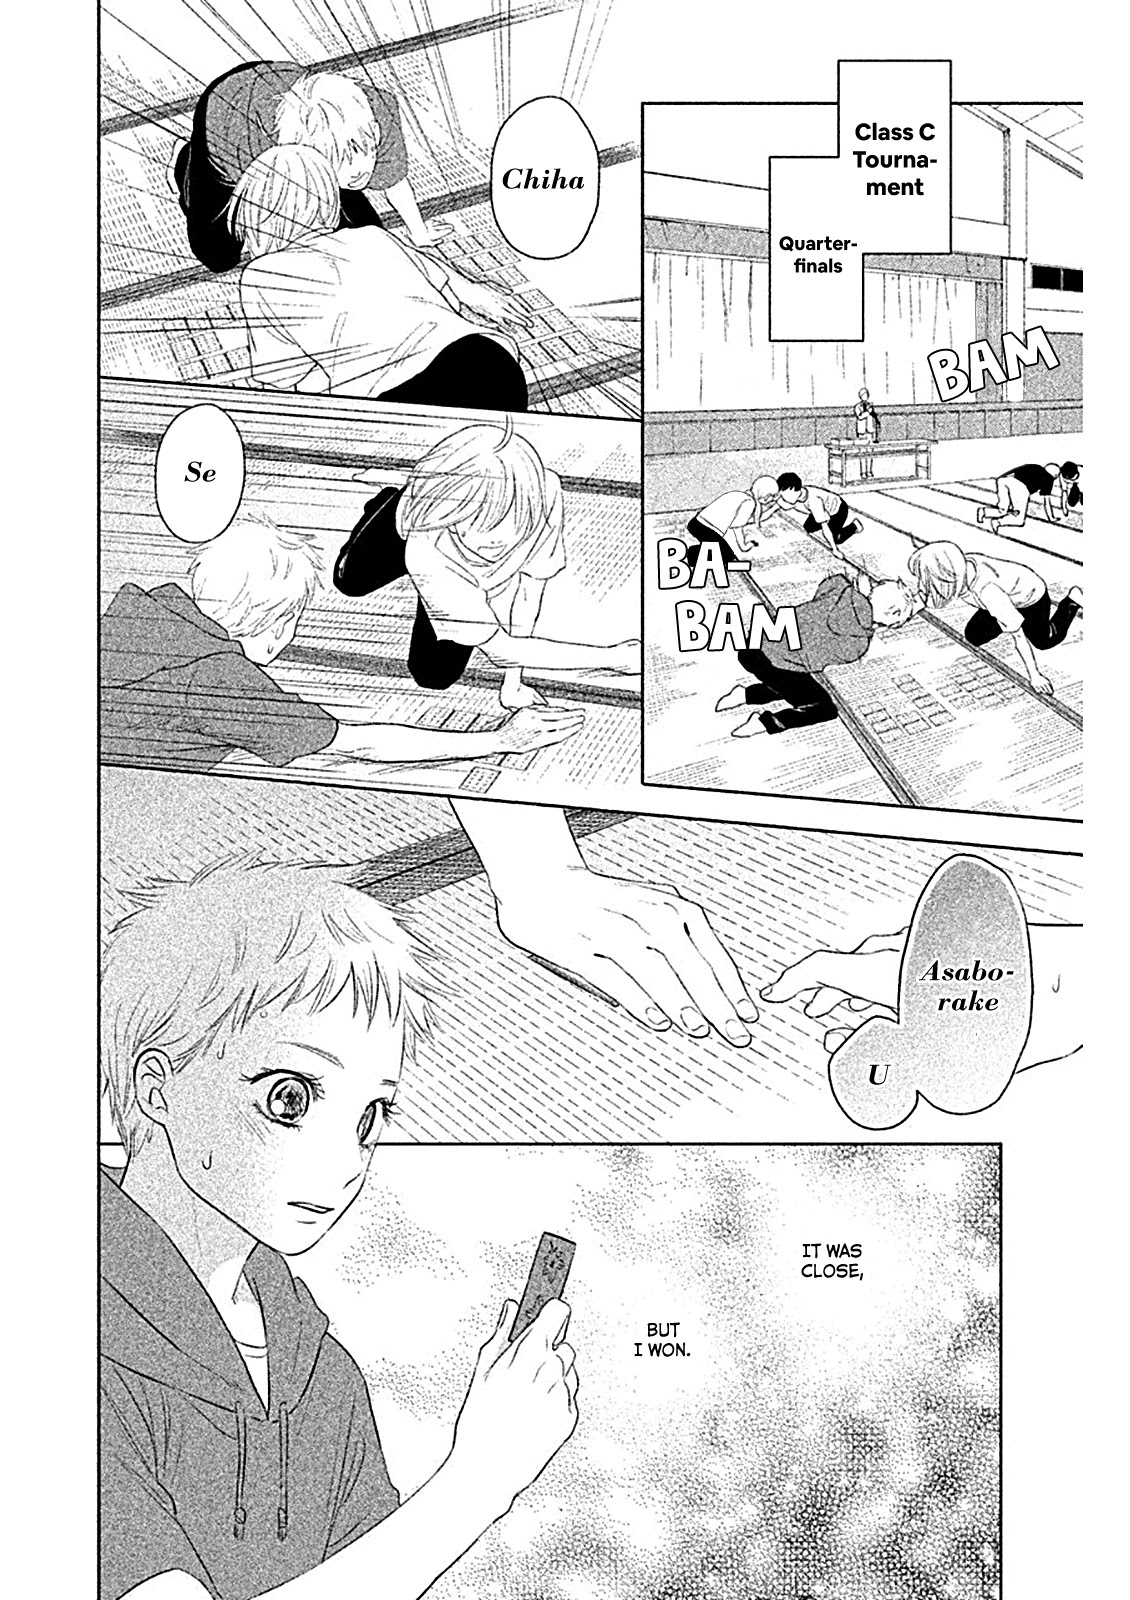 Chihayafuru: Middle School Arc Chapter 5: 5Th Poem - Picture 3